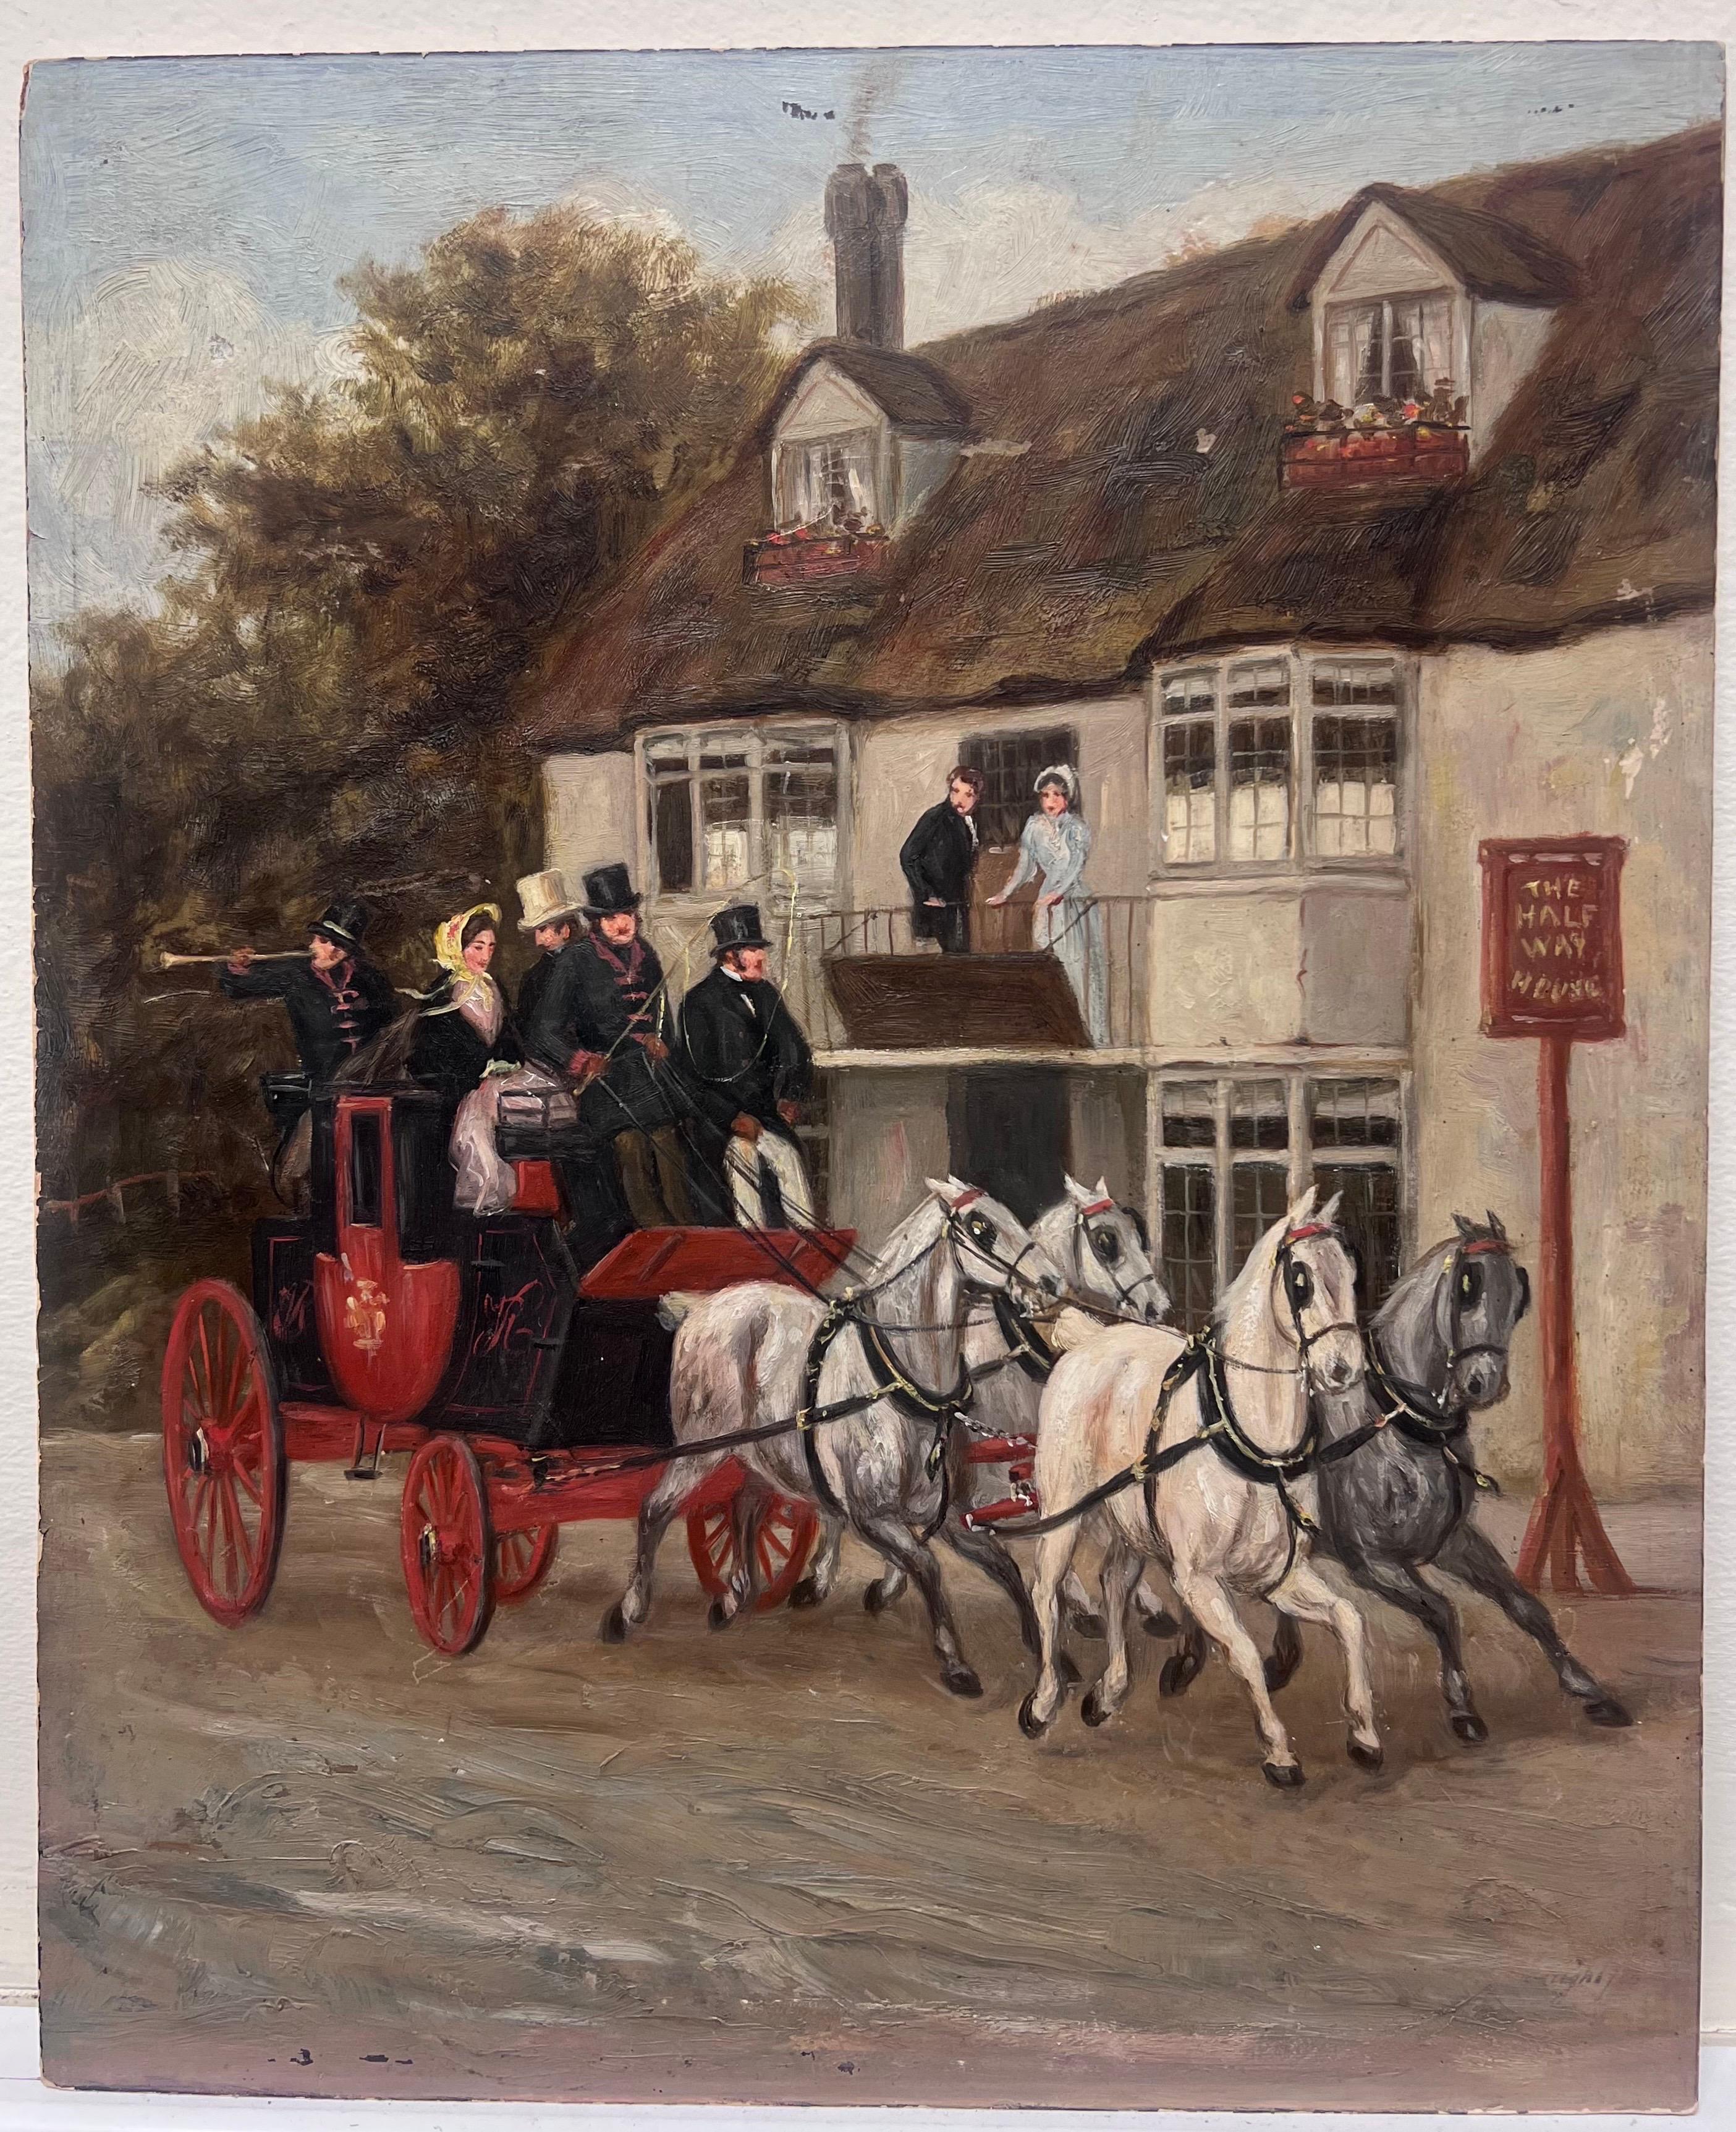 The Half Way Hotel
English artist, late 19th century
(double sided painting with a hunting scene to the reverse). 
oil painting on board, unframed
board: 13 x 10.75 inches
provenance: private collection, Surrey, England
condition: good and sound